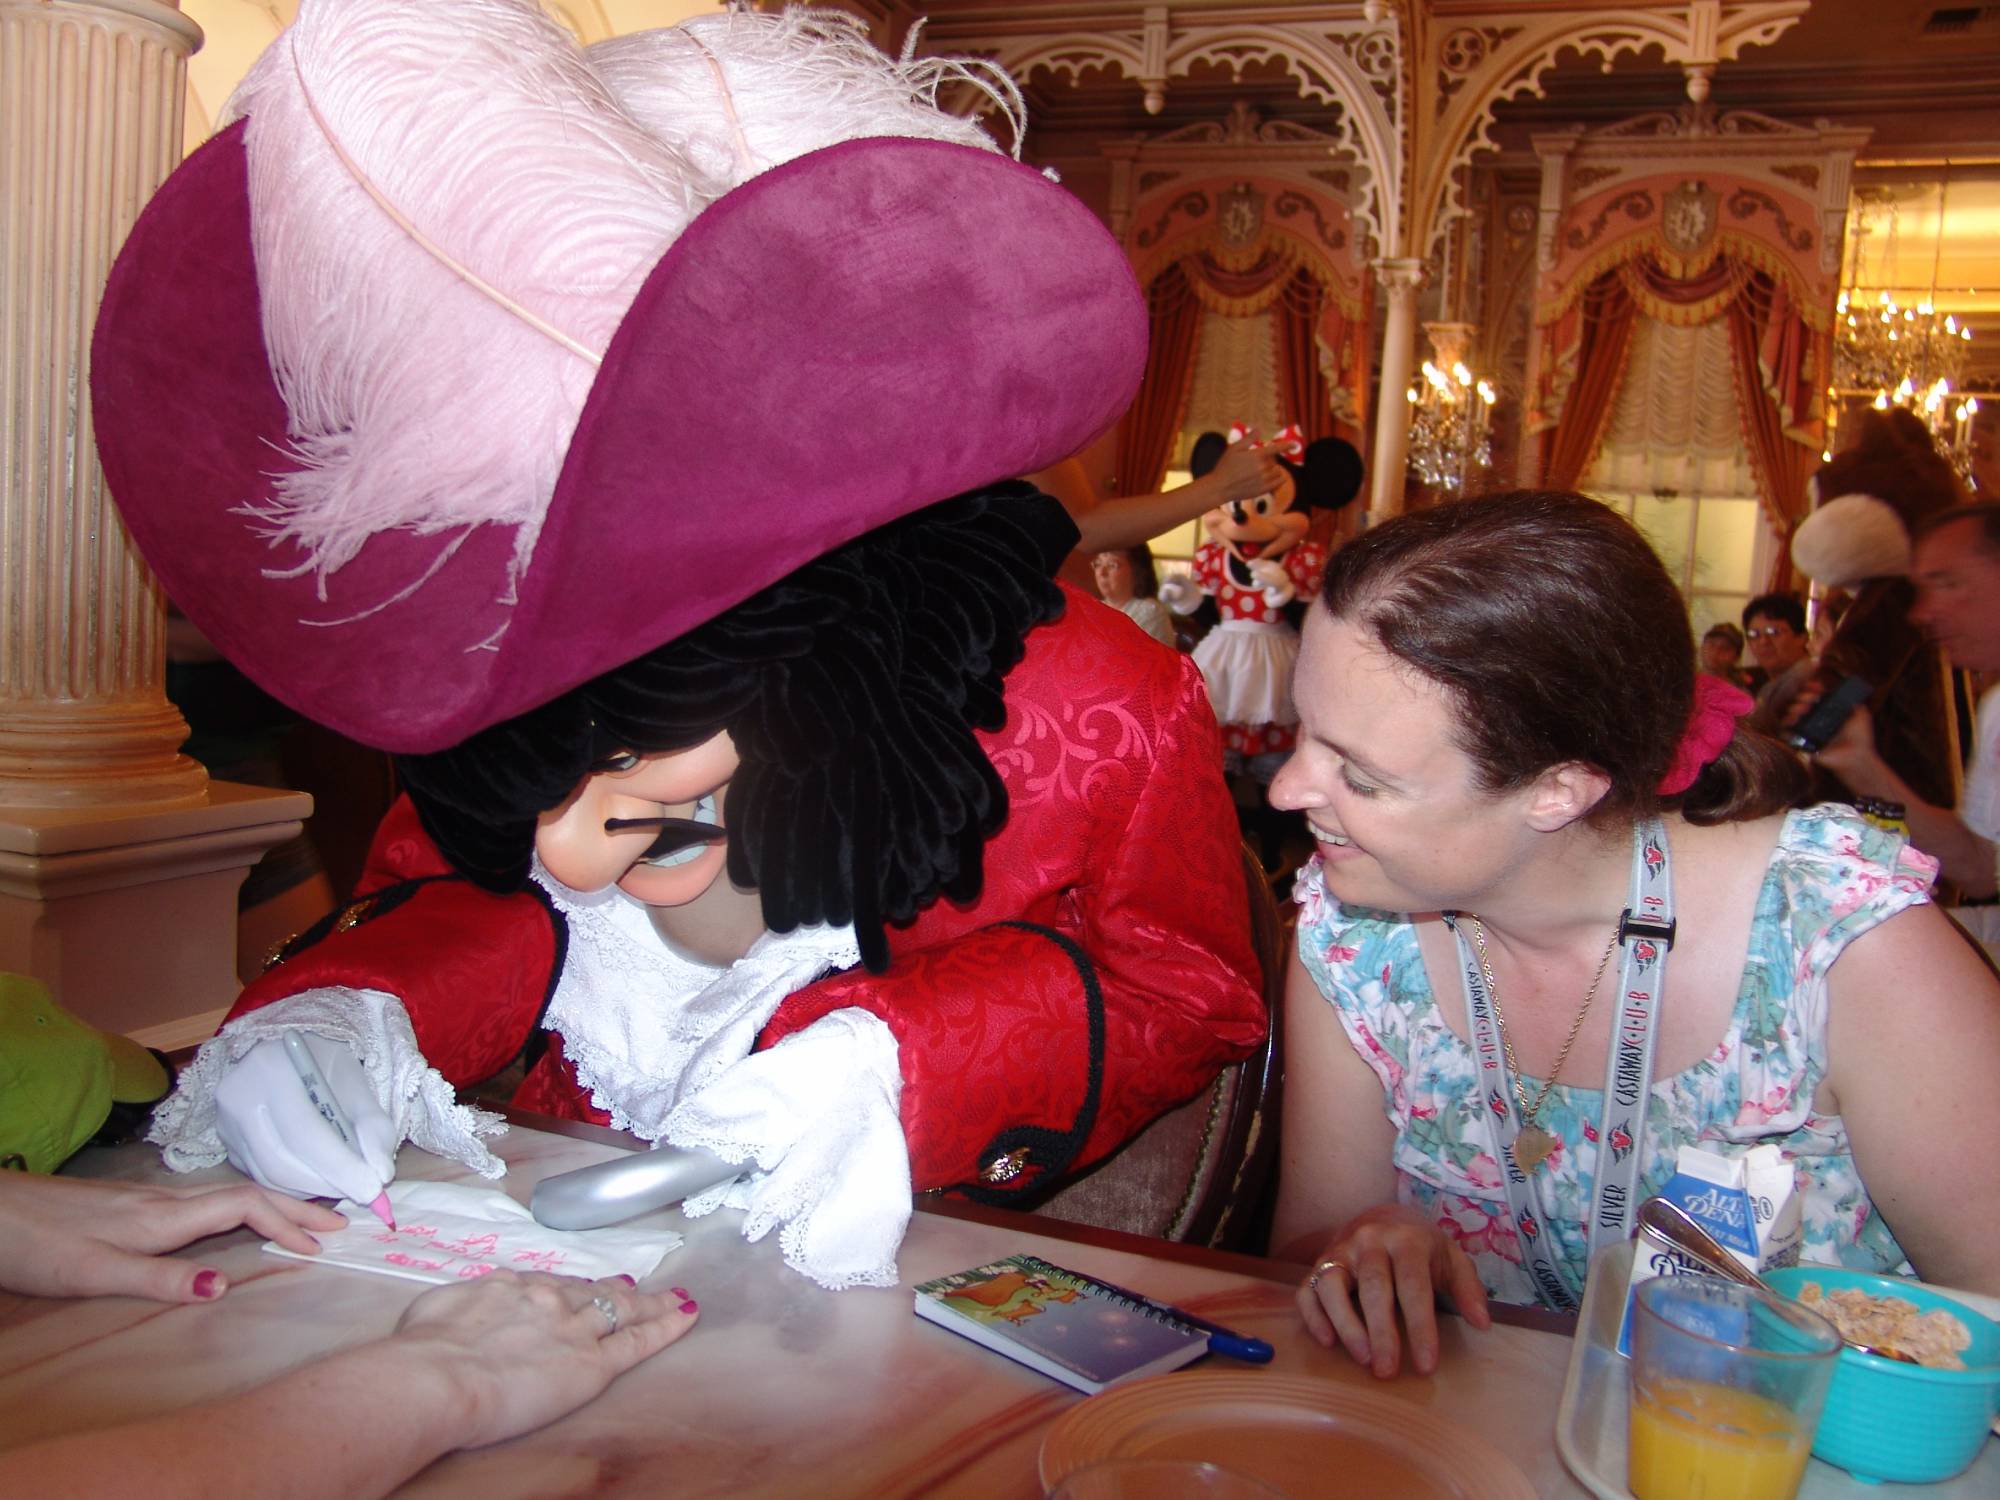 Enjoy the difference character dining experiences at Disney Parks around the world | PassPorter.com